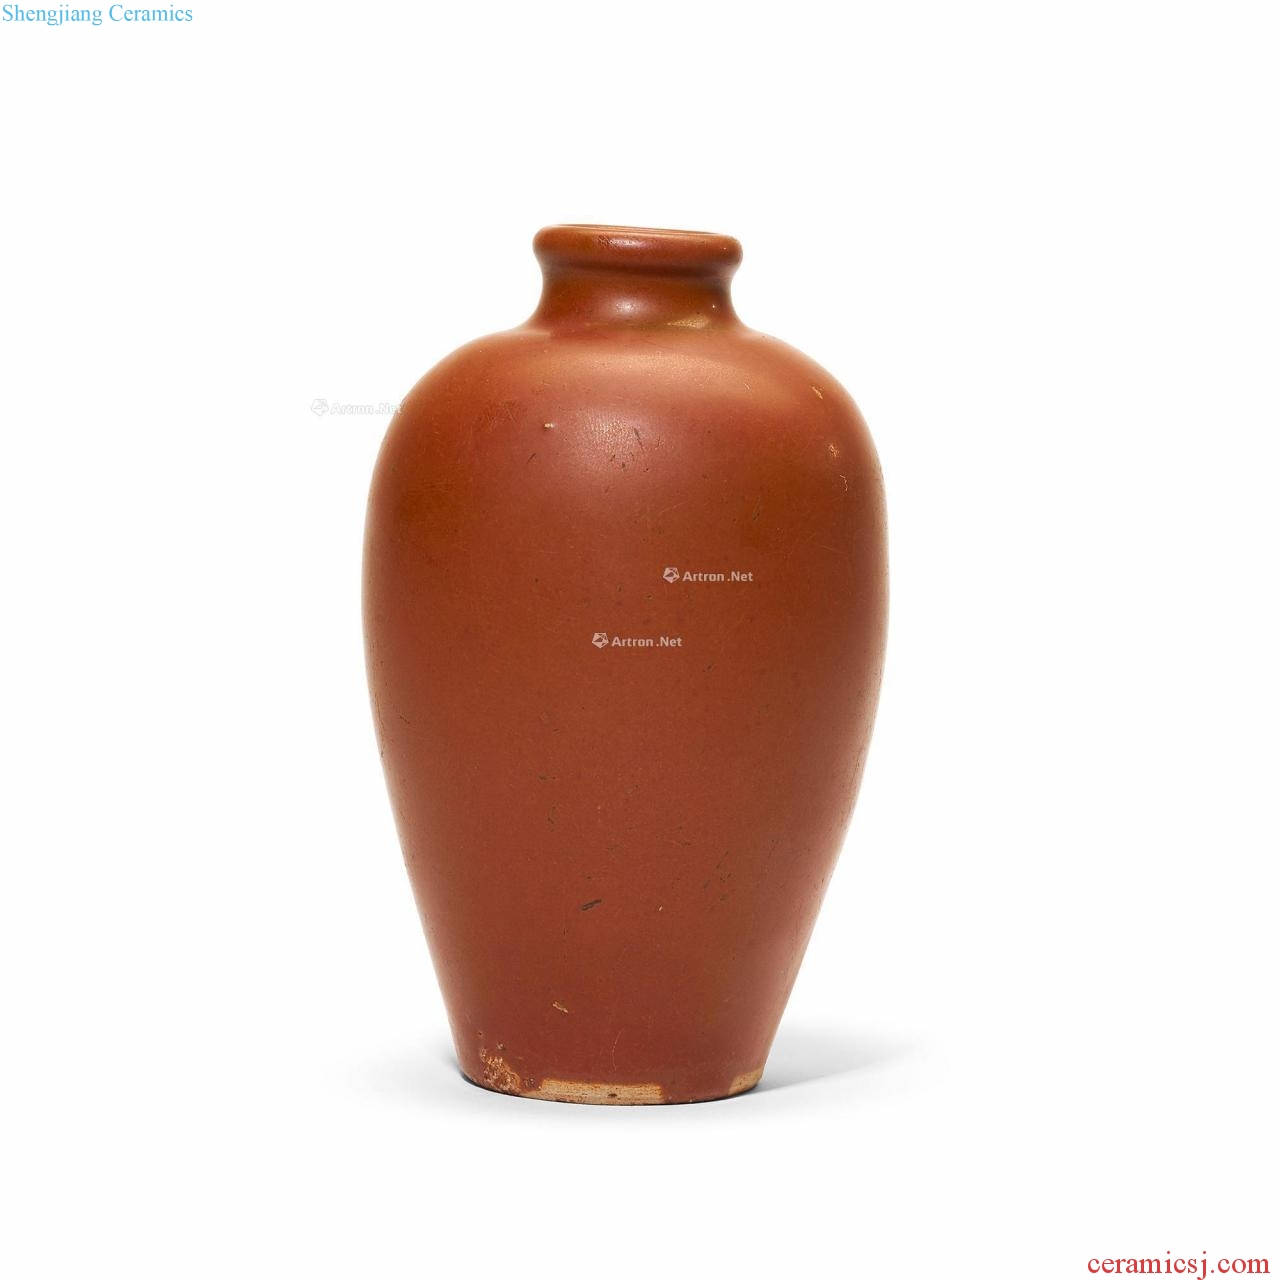 Northern song dynasty yao state kiln persimmon glaze xiaomei bottles